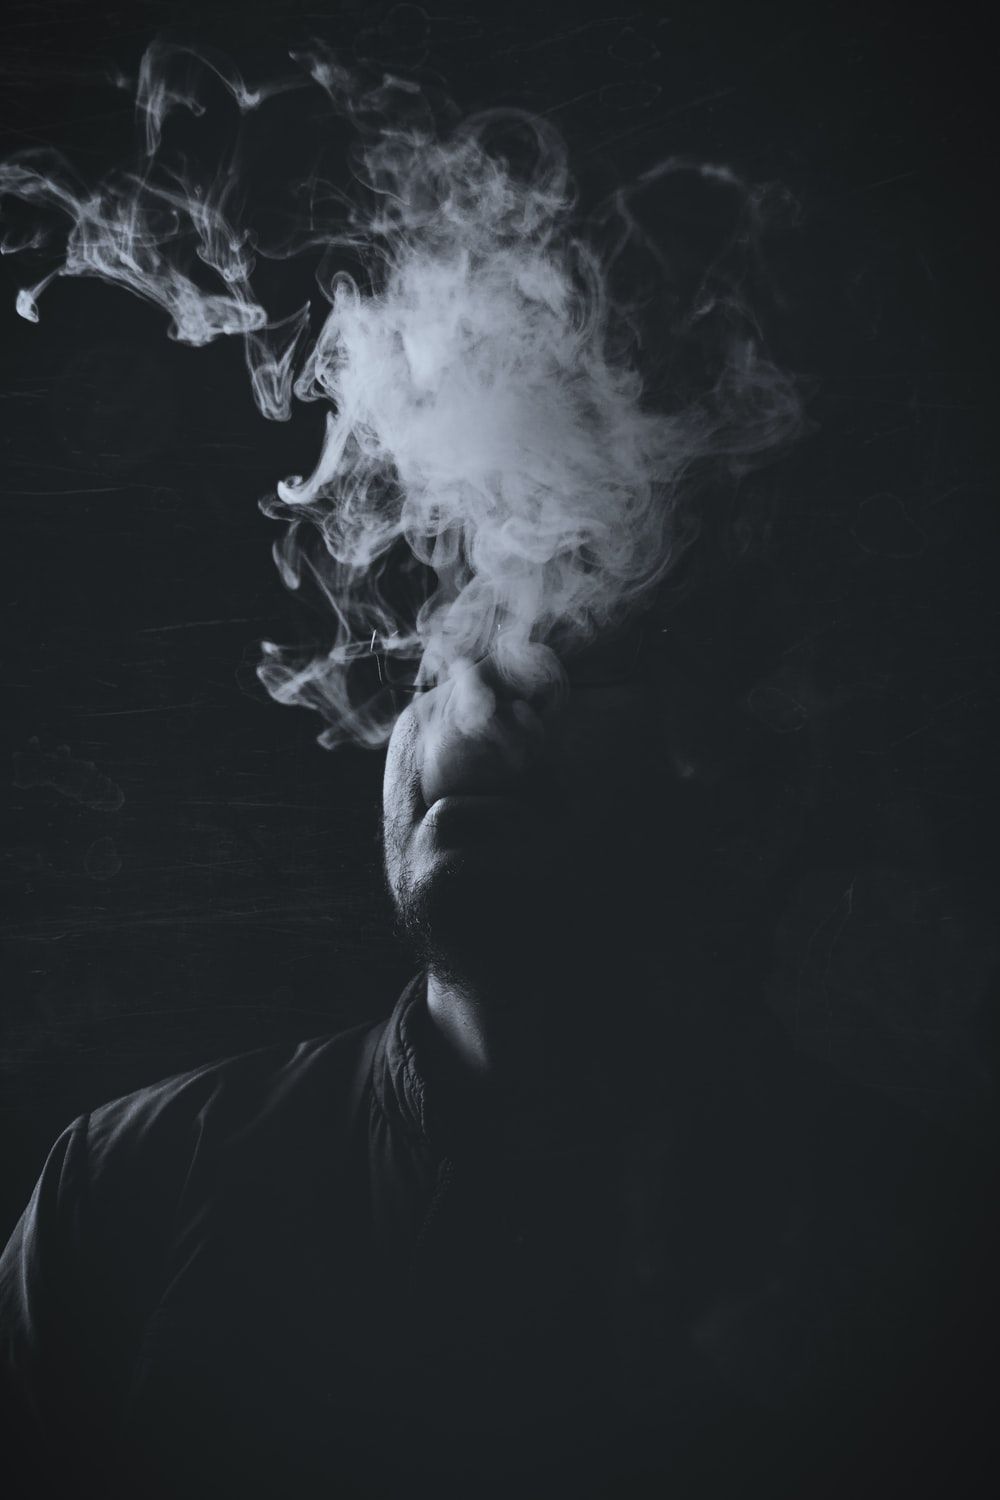 Vape Picture [HD]. Download Free Image